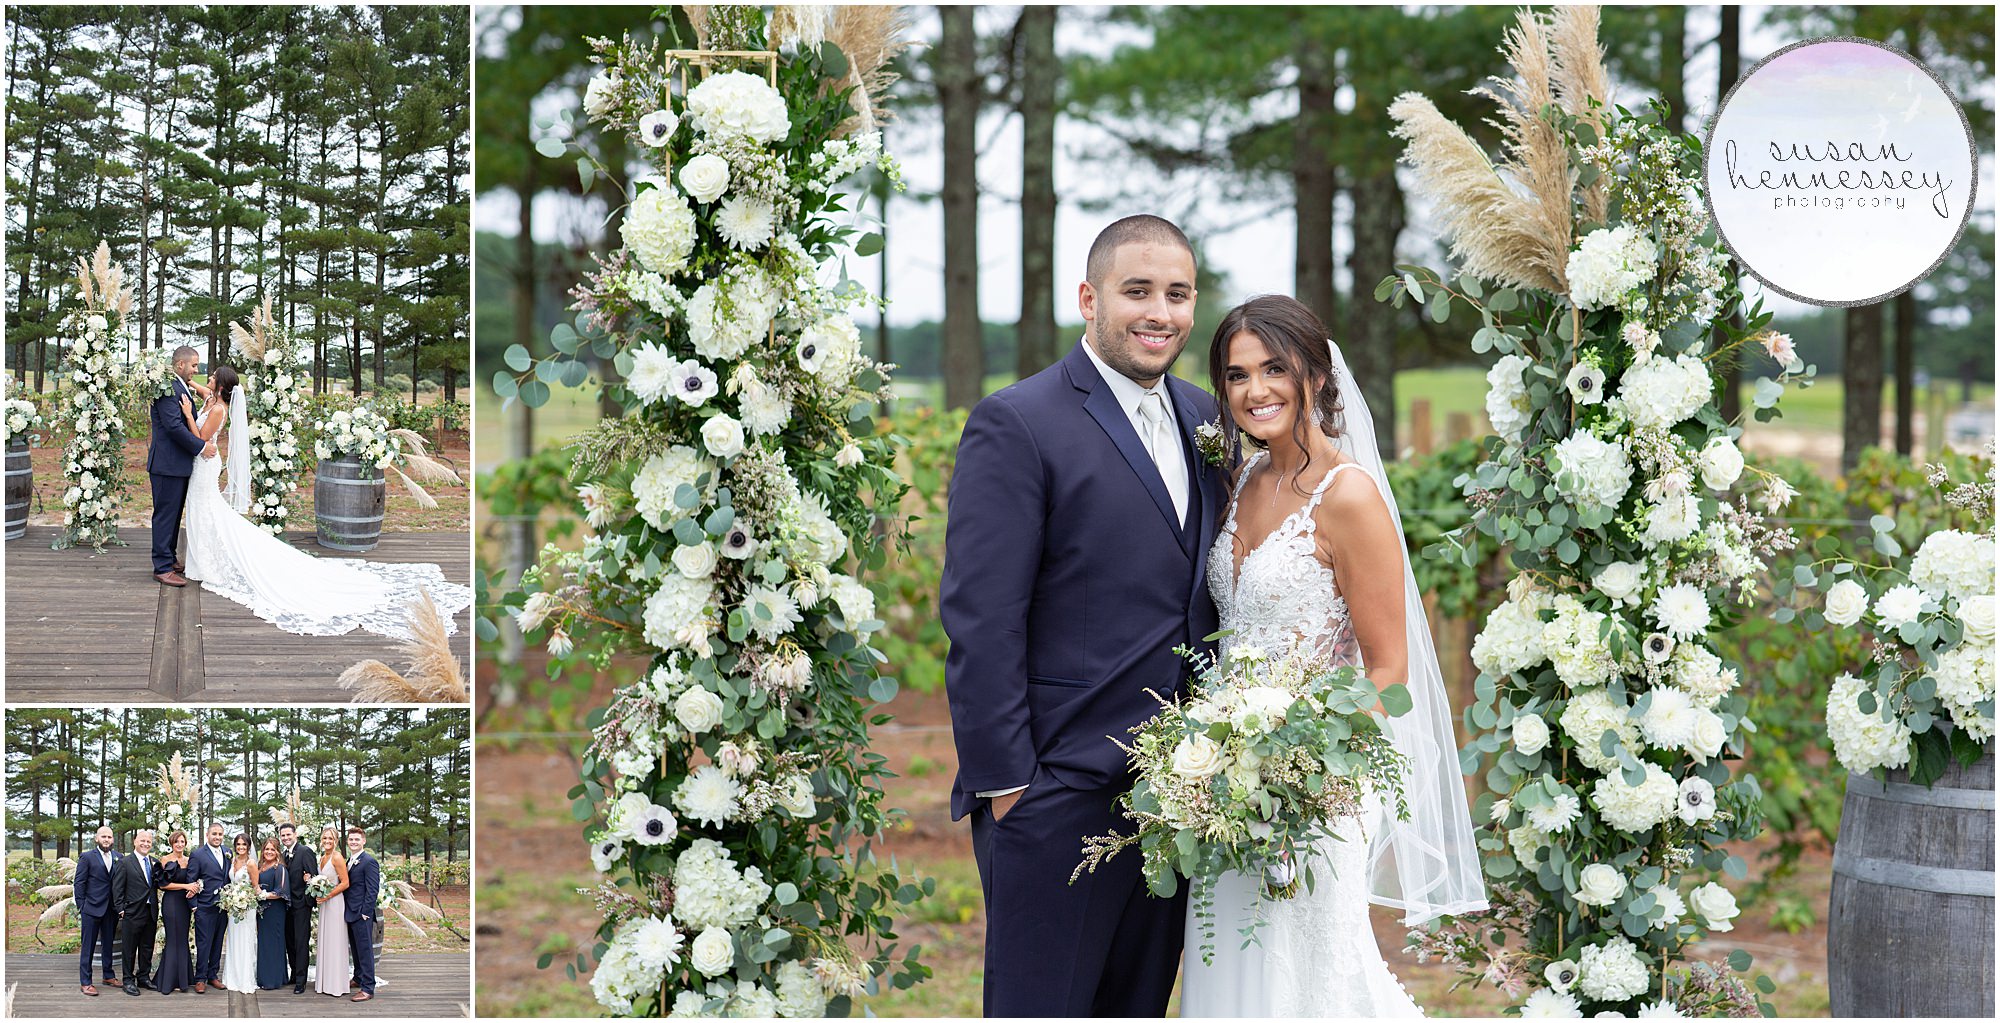 The ceremony grounds make Renault Winery one of the best Wedding Venues in South Jersey.